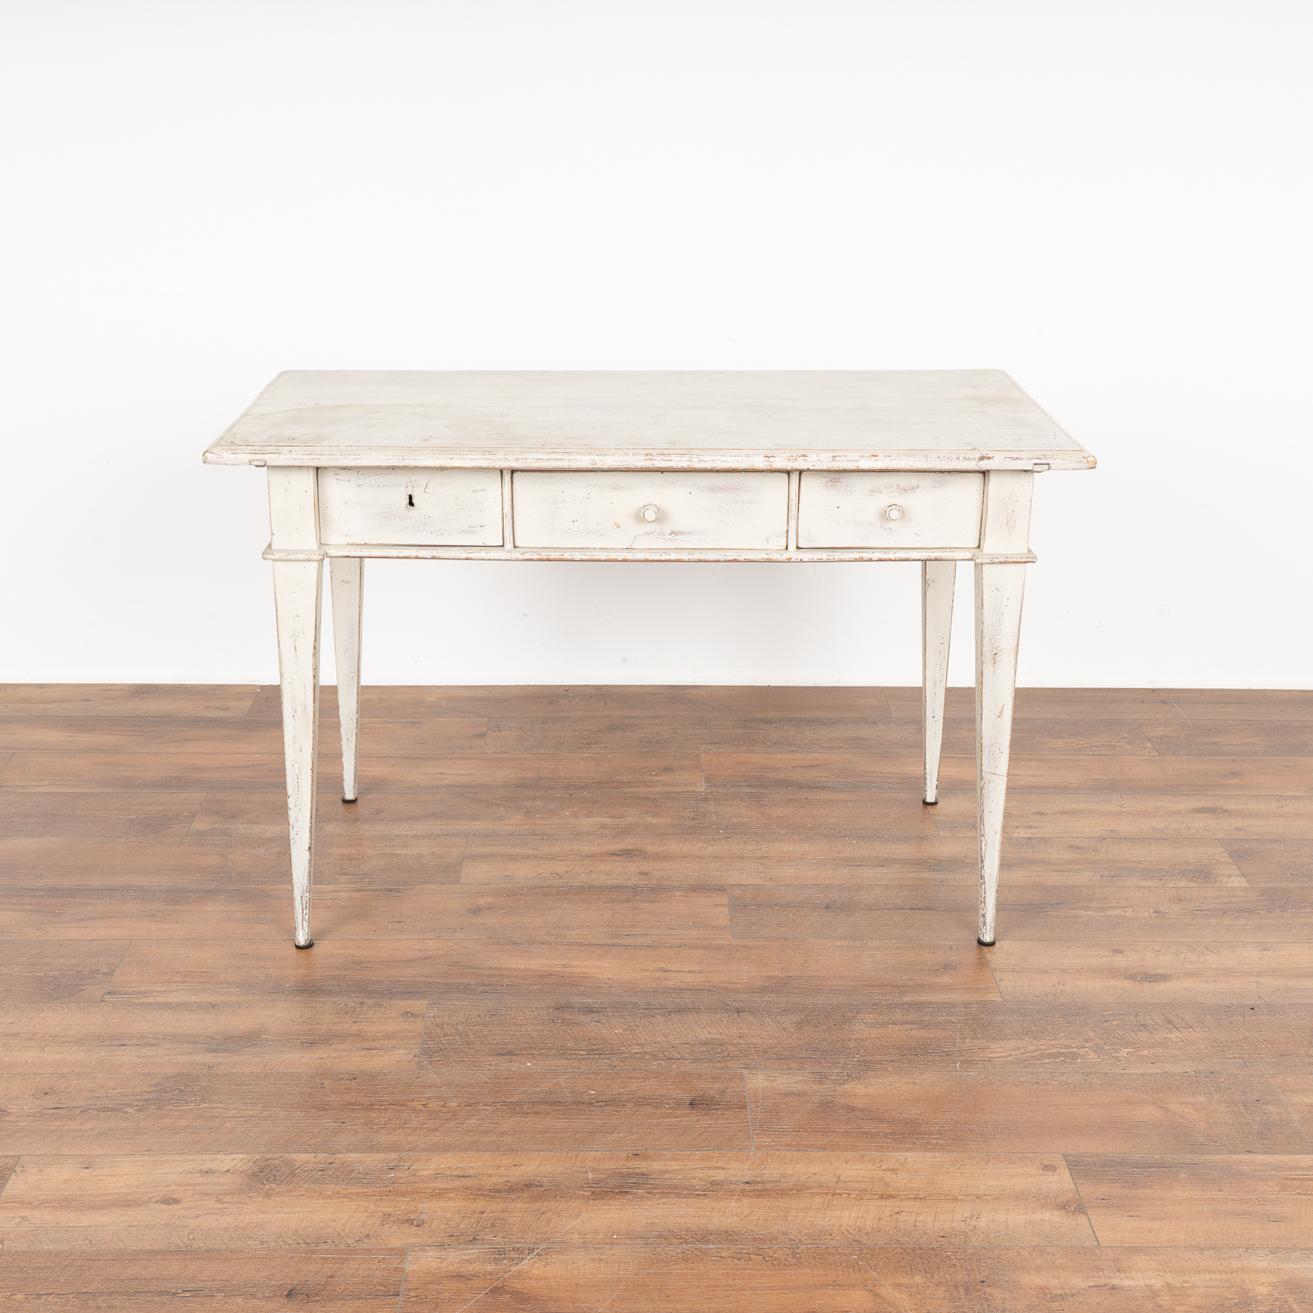 Country Antique White Side Table Small Writing Table With 3 Drawers, Sweden circa 1880